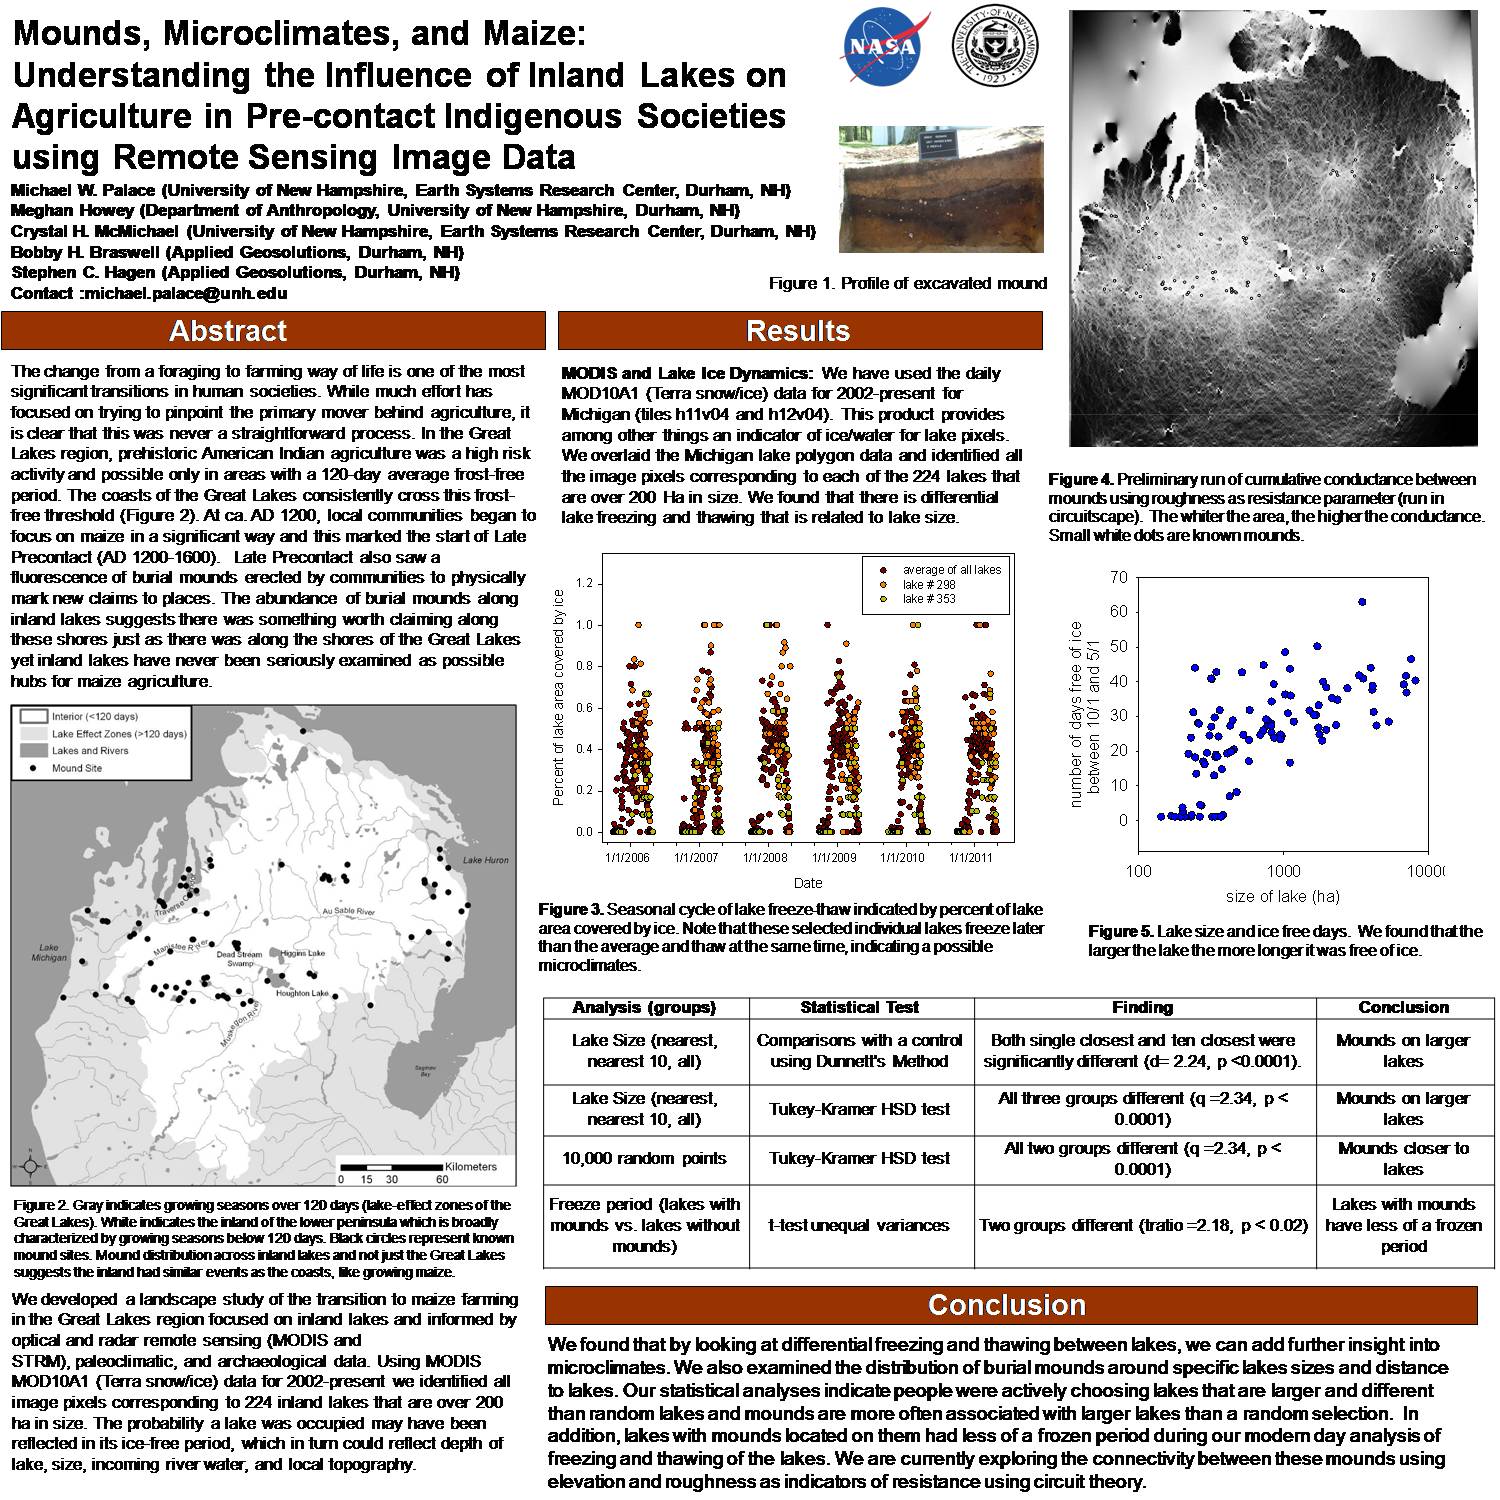 Mounds, Microclimates, And Maize:  Understanding The Influence Of Inland Lakes On Agriculture In Pre-Contact Indigenous Societies Using Remote Sensing Image Data  by palace